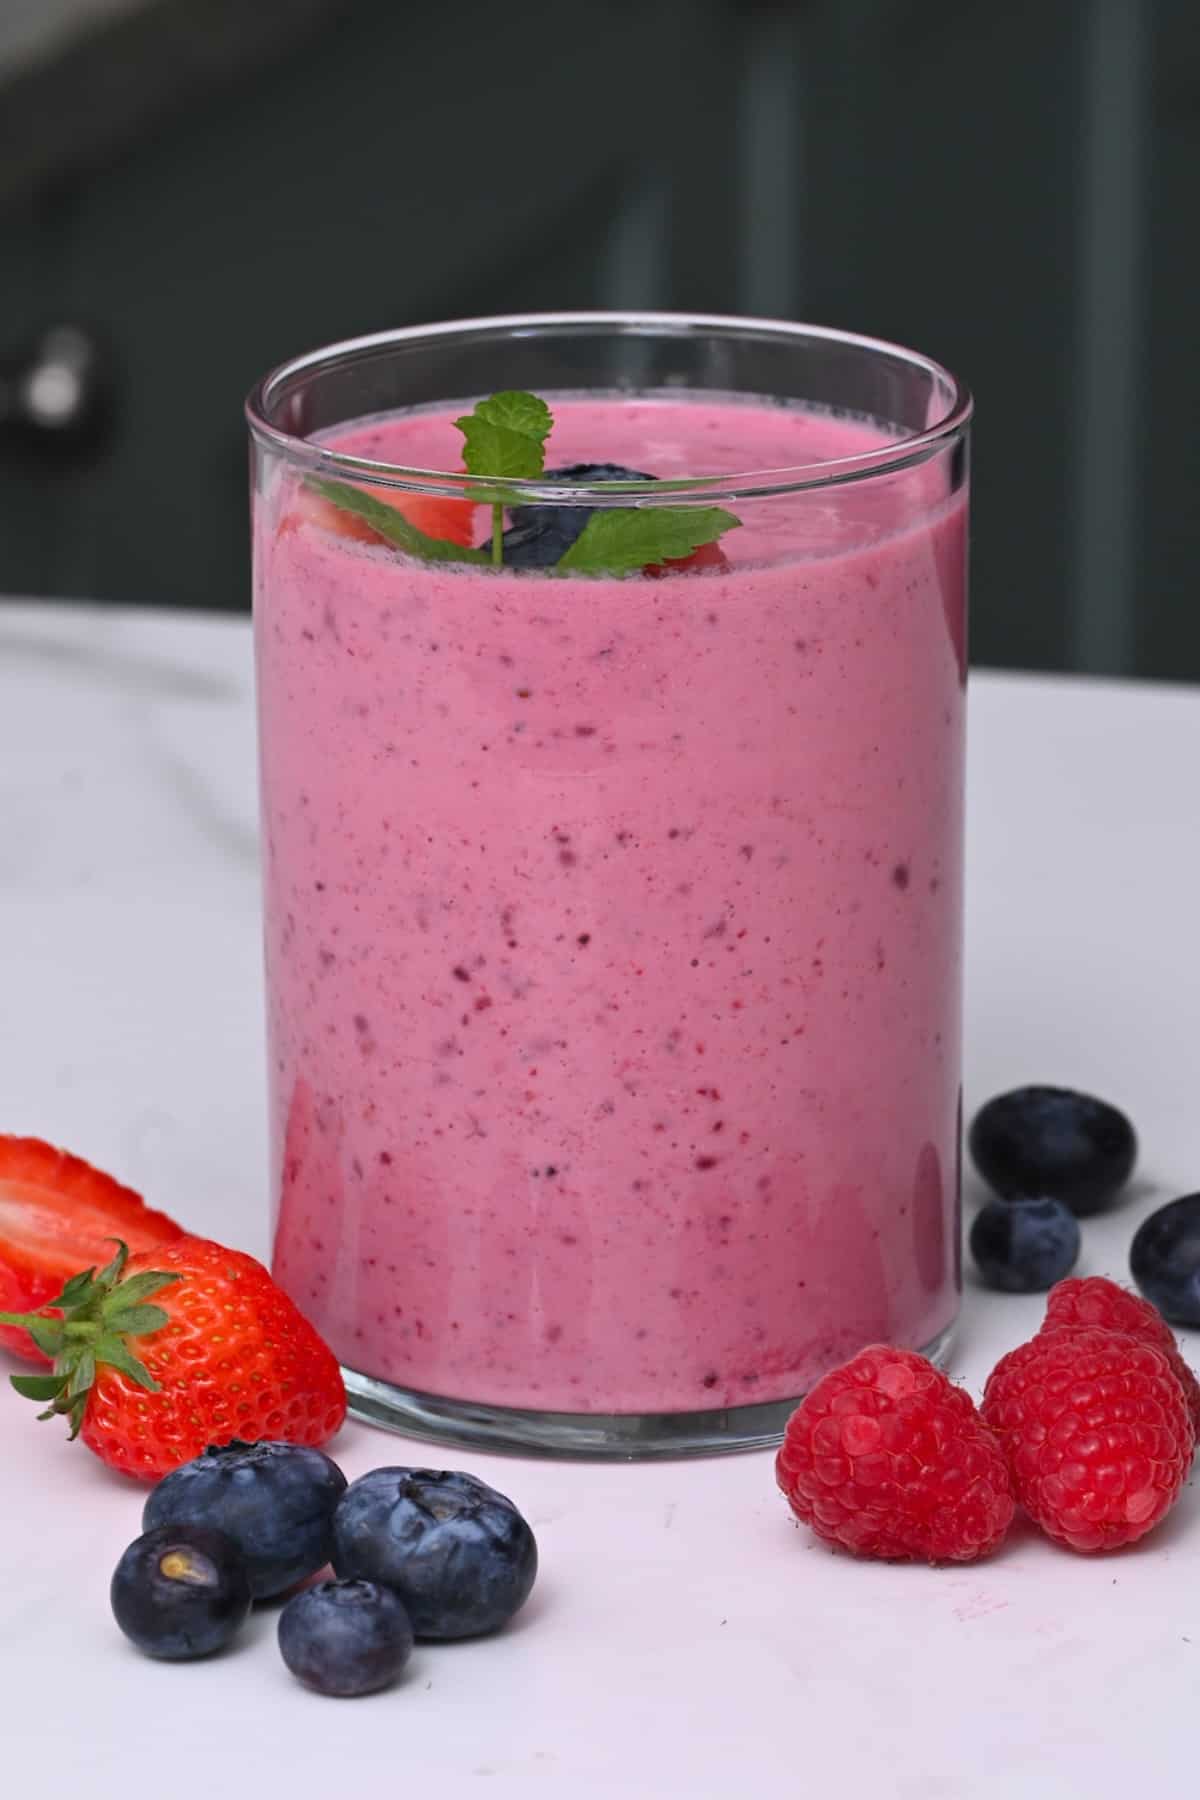 https://www.alphafoodie.com/wp-content/uploads/2022/05/Mixed-Berry-Smoothie-Main1-updated.jpeg